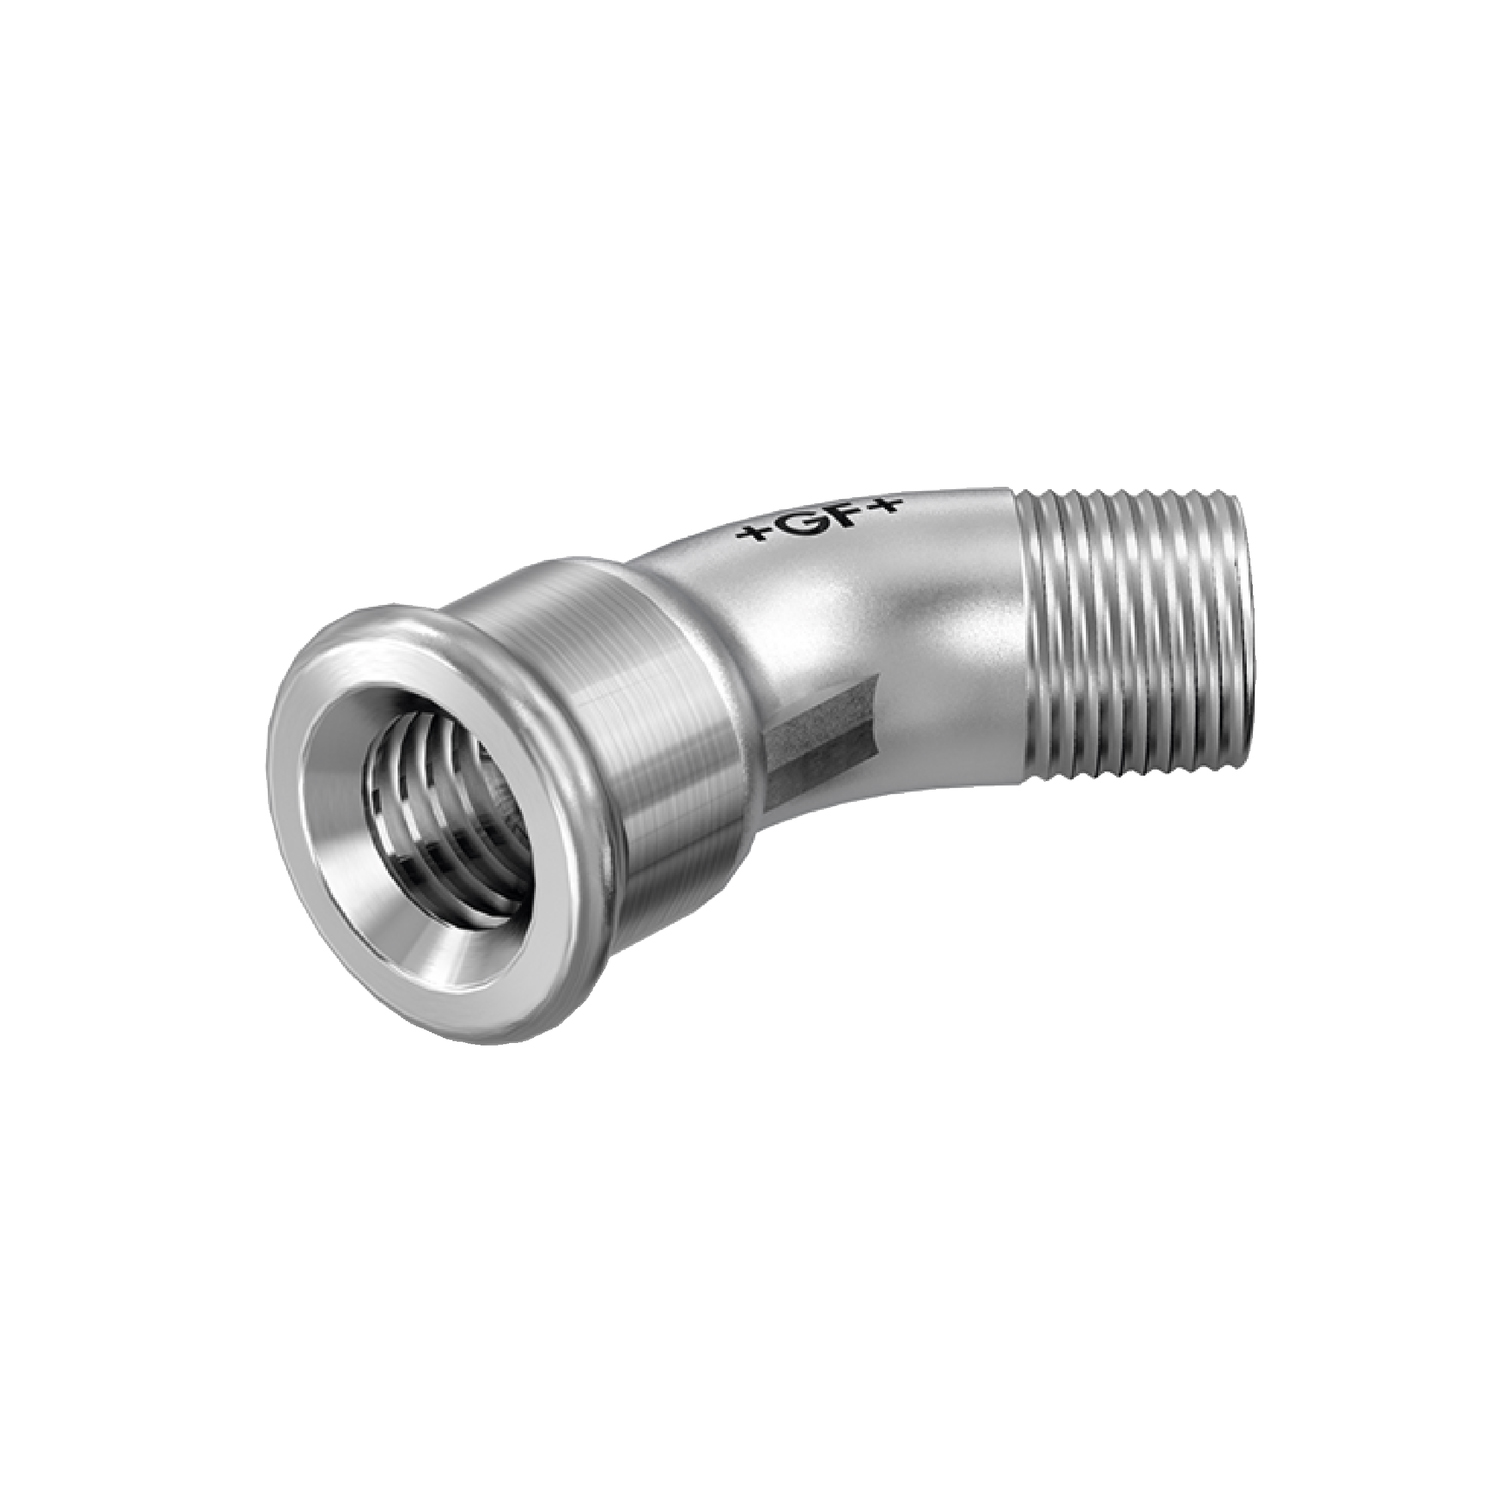 Fitting for Lubricator, Connecting Piece